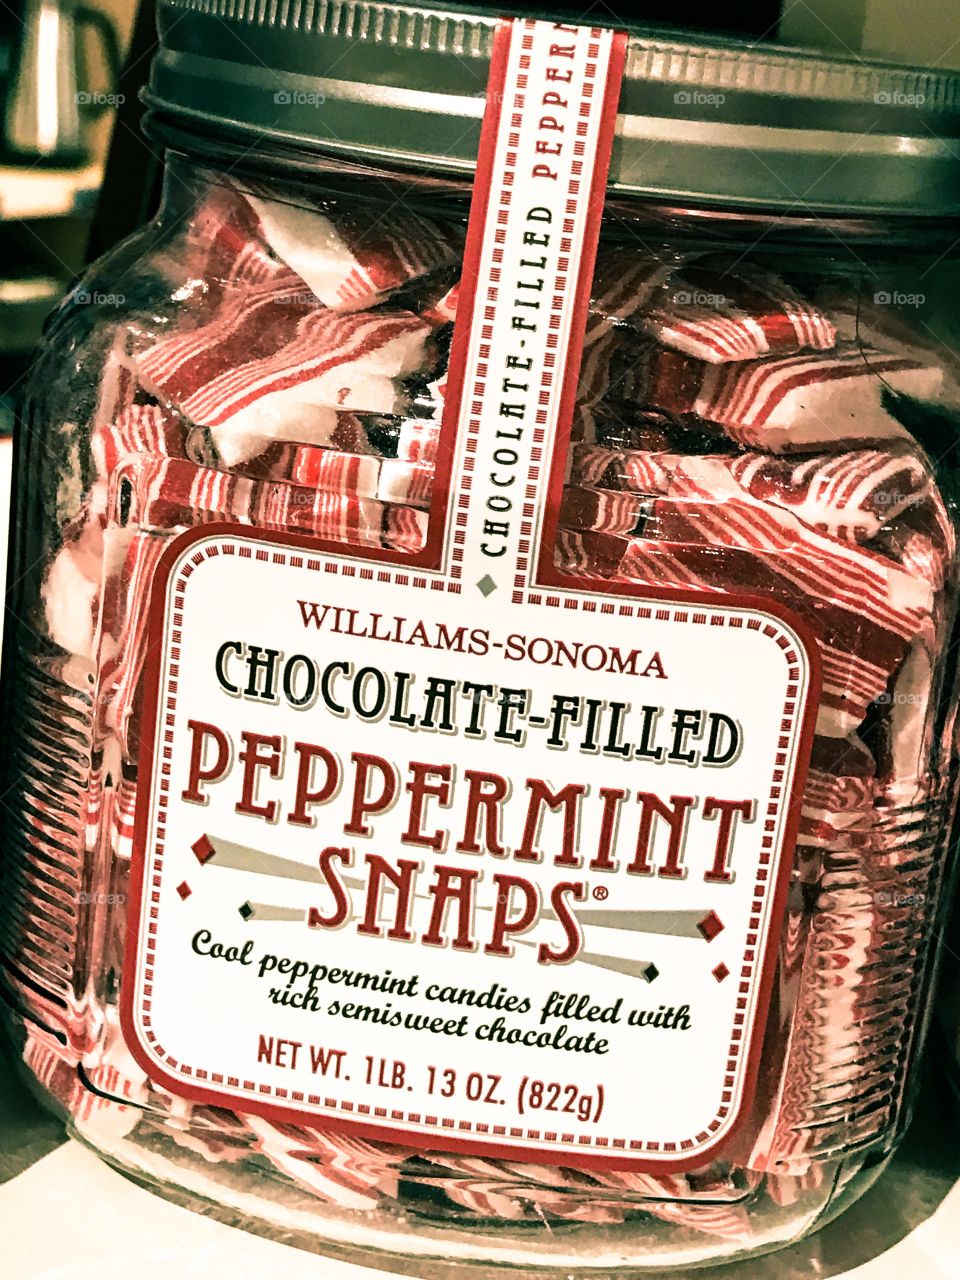 Peppermint snaps for everyone, except for Bobby, he doesn't like peppermint. Very strange. Strange indeed. 